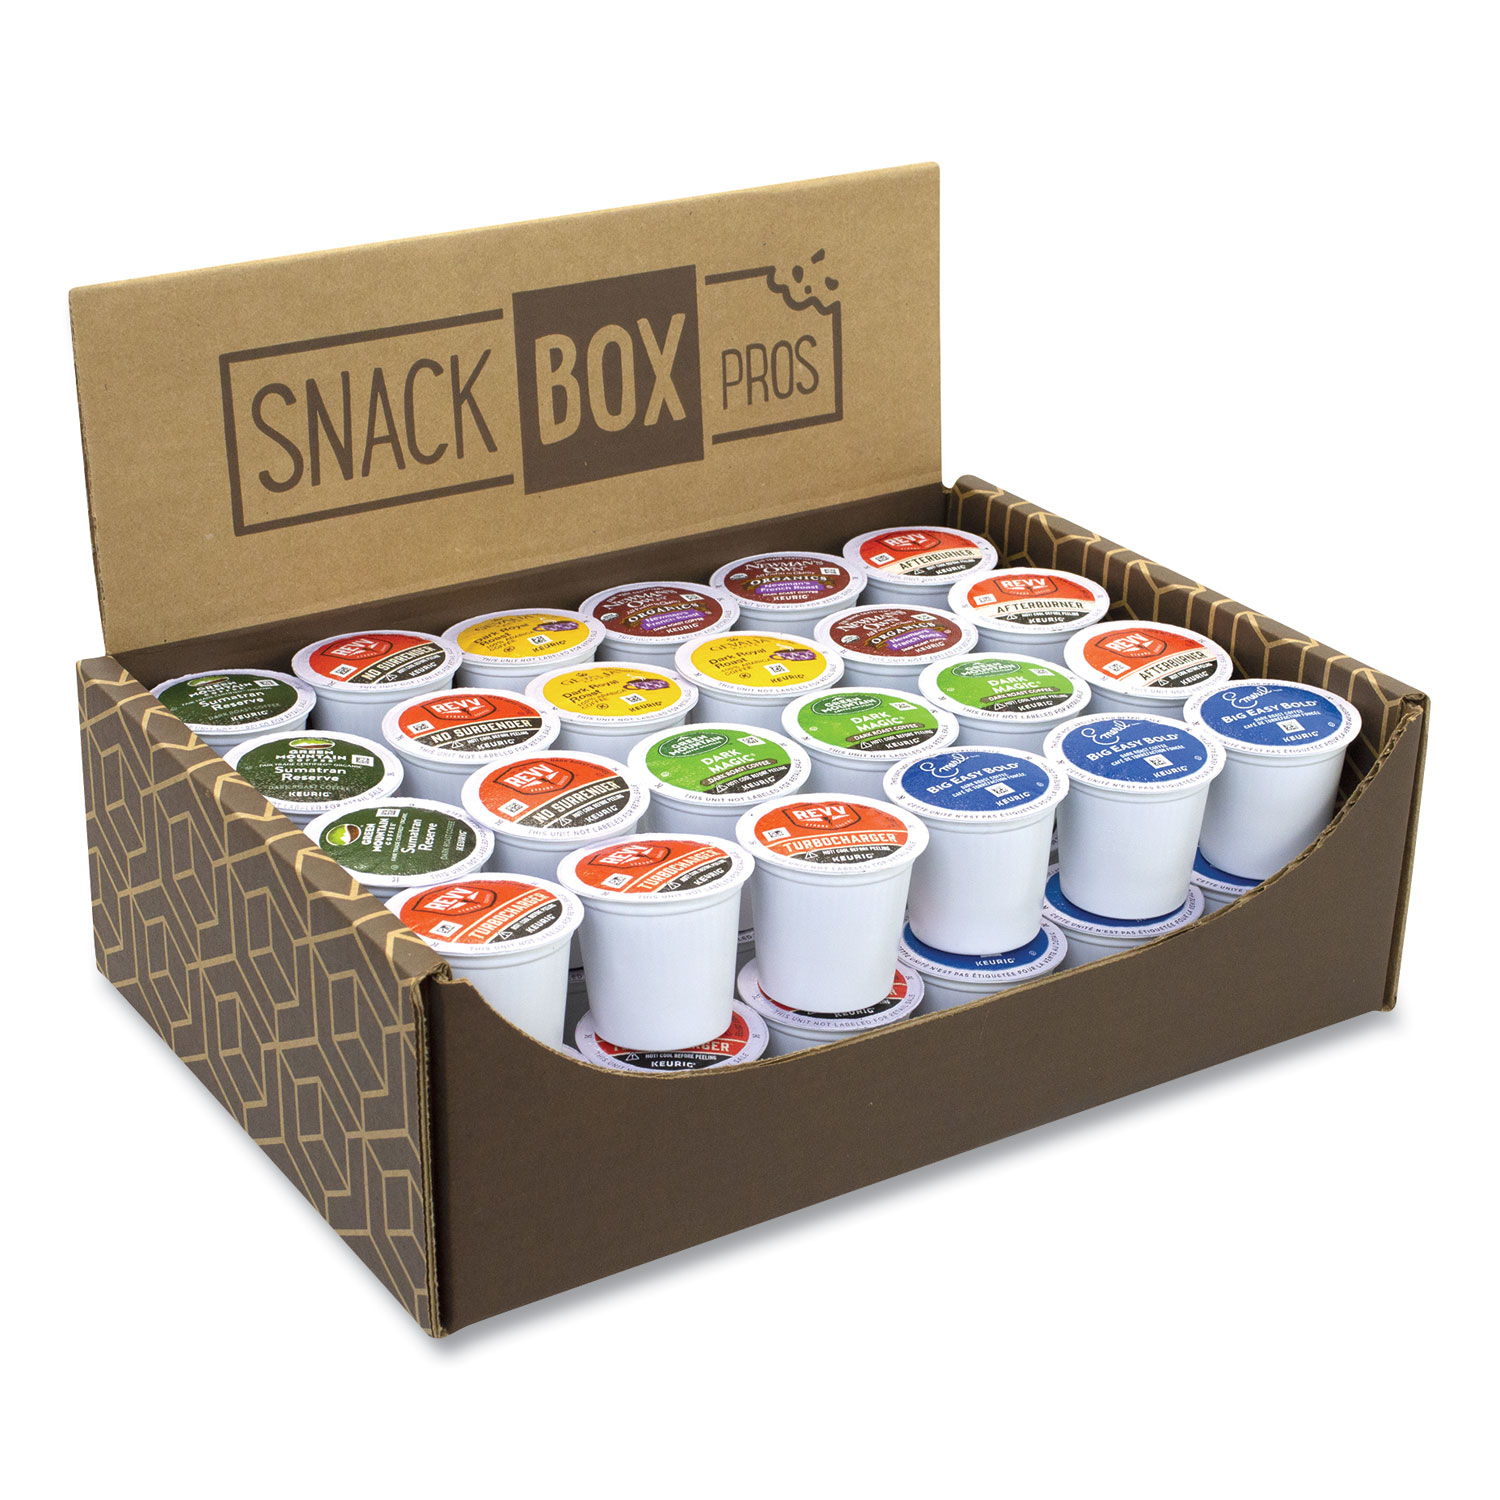 Snack Box Pros Bold and Strong K-Cup Assortment, 48/Box, Free Delivery in 1-4 Business Days